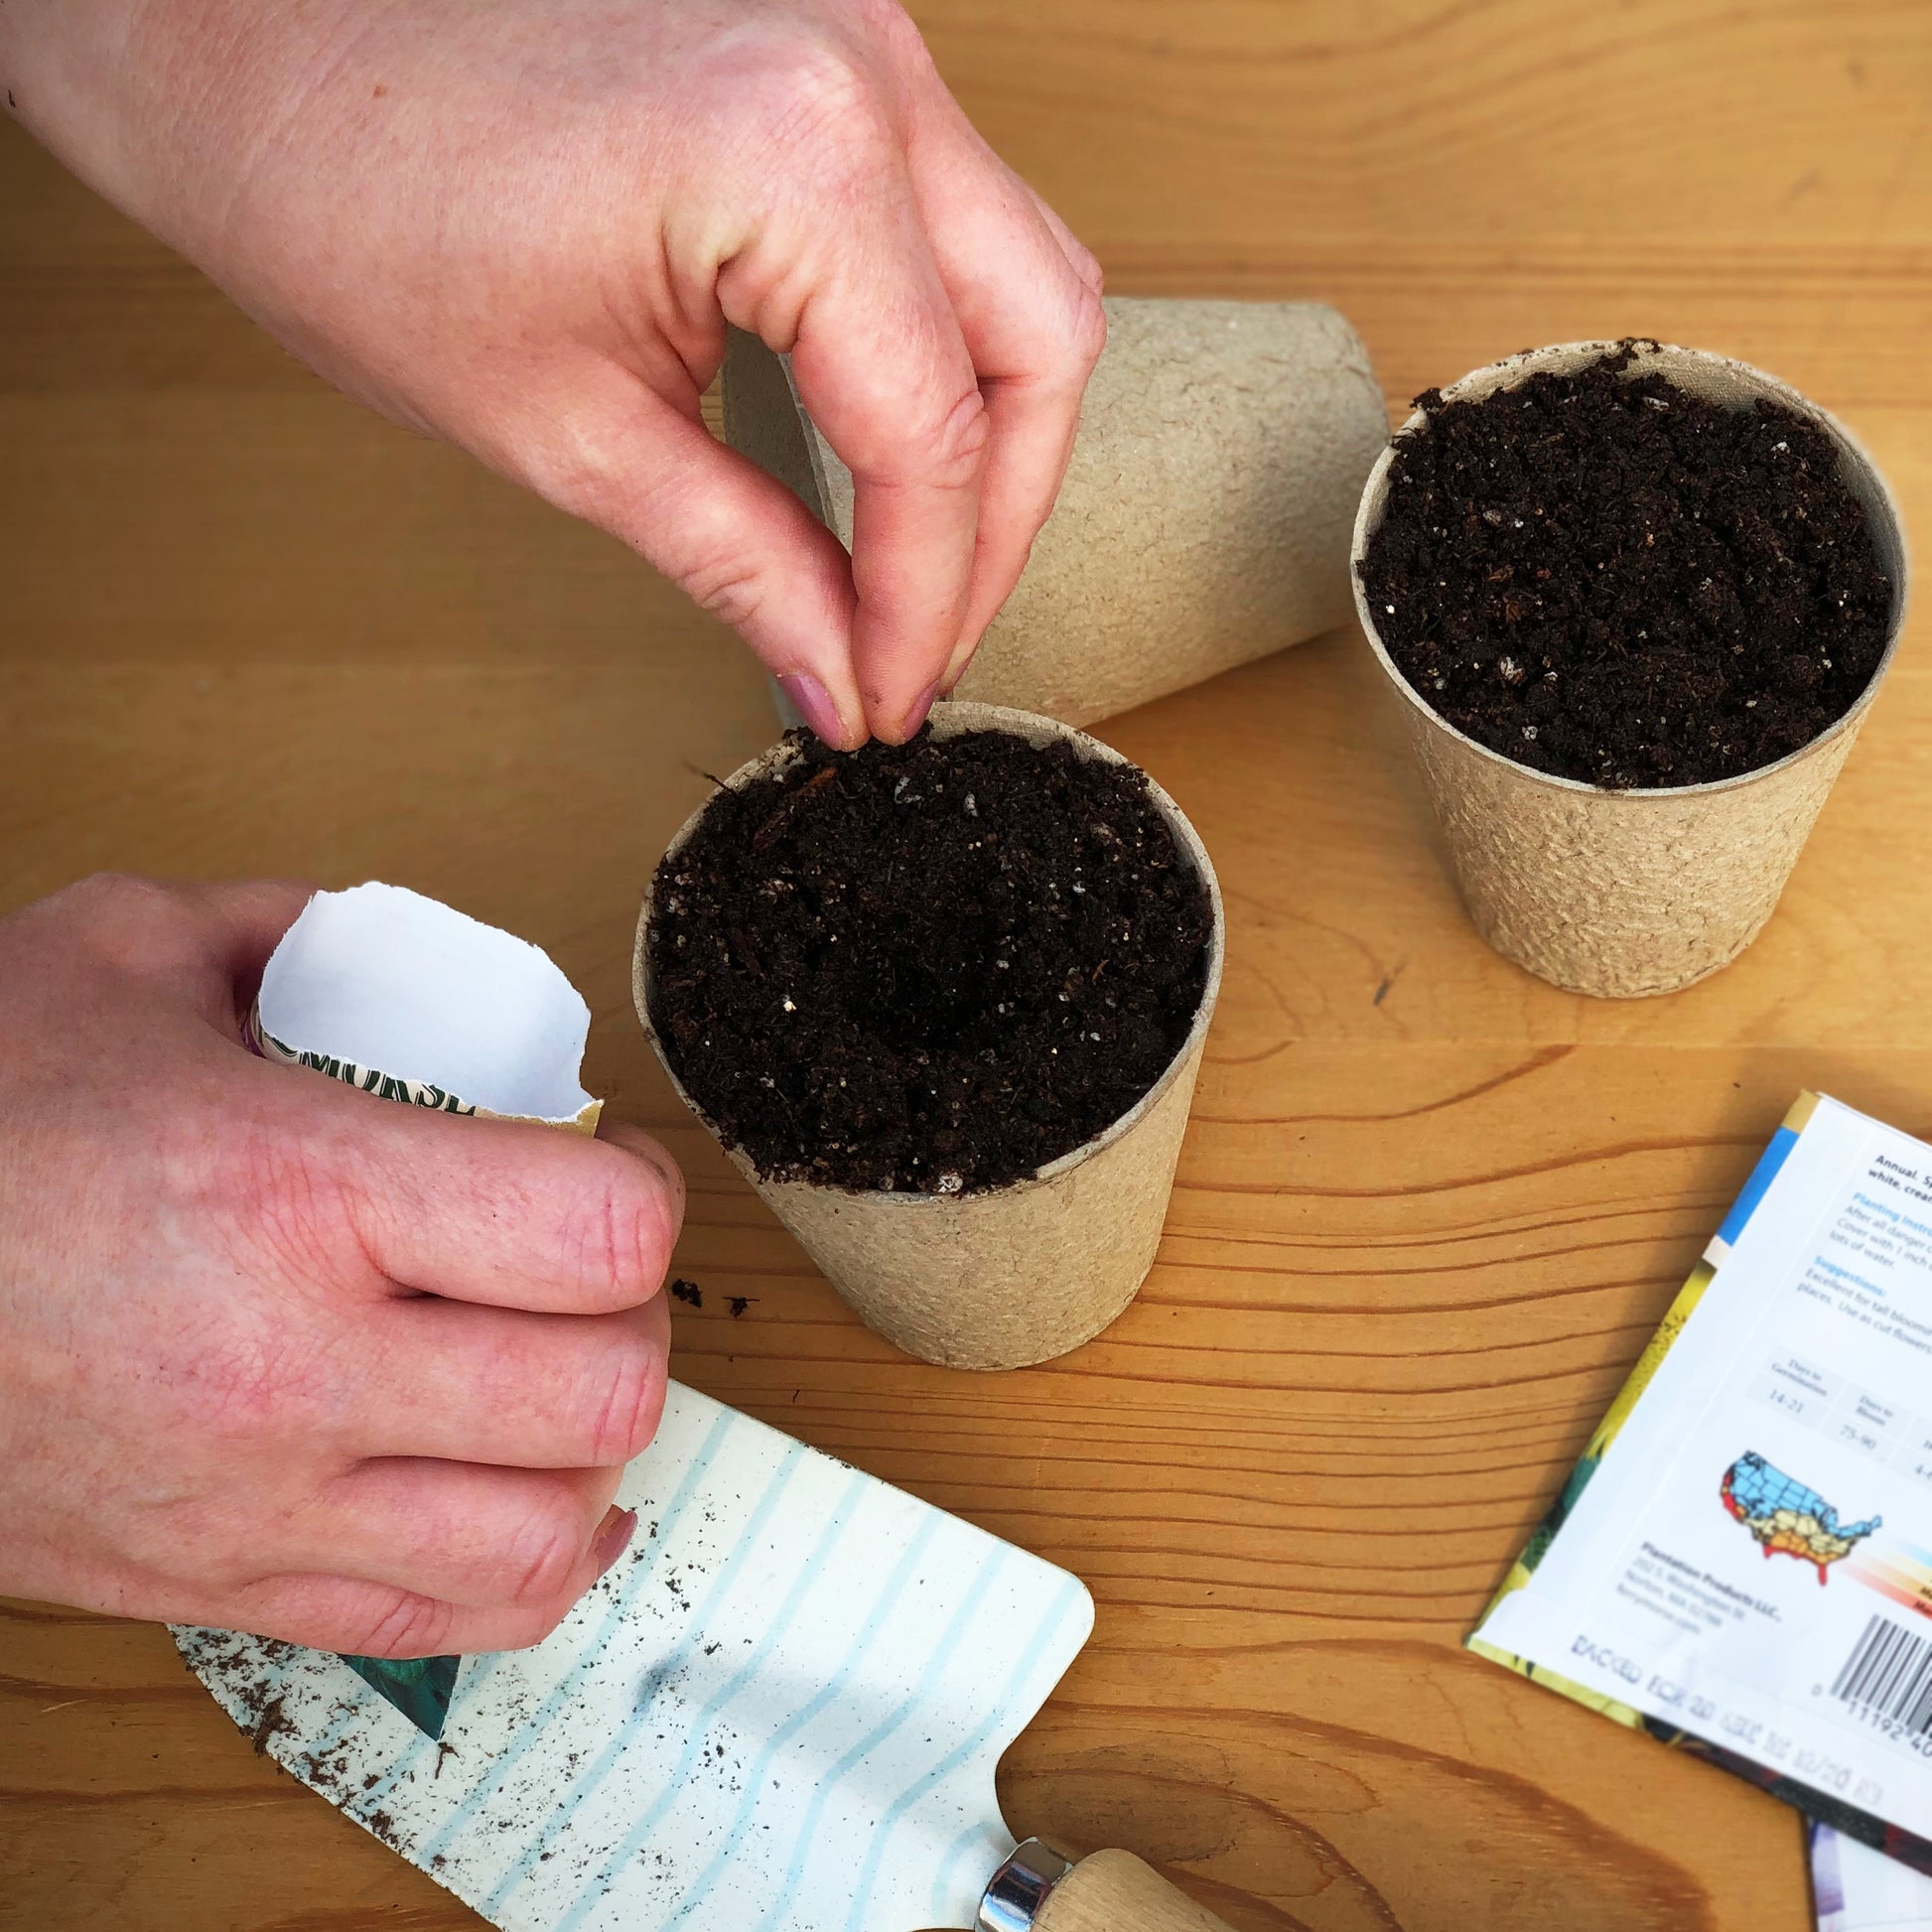 Start your Dark Green Zucchini Organic Squash seeds in biodegradable peat pots or paper pots with sowing mix.